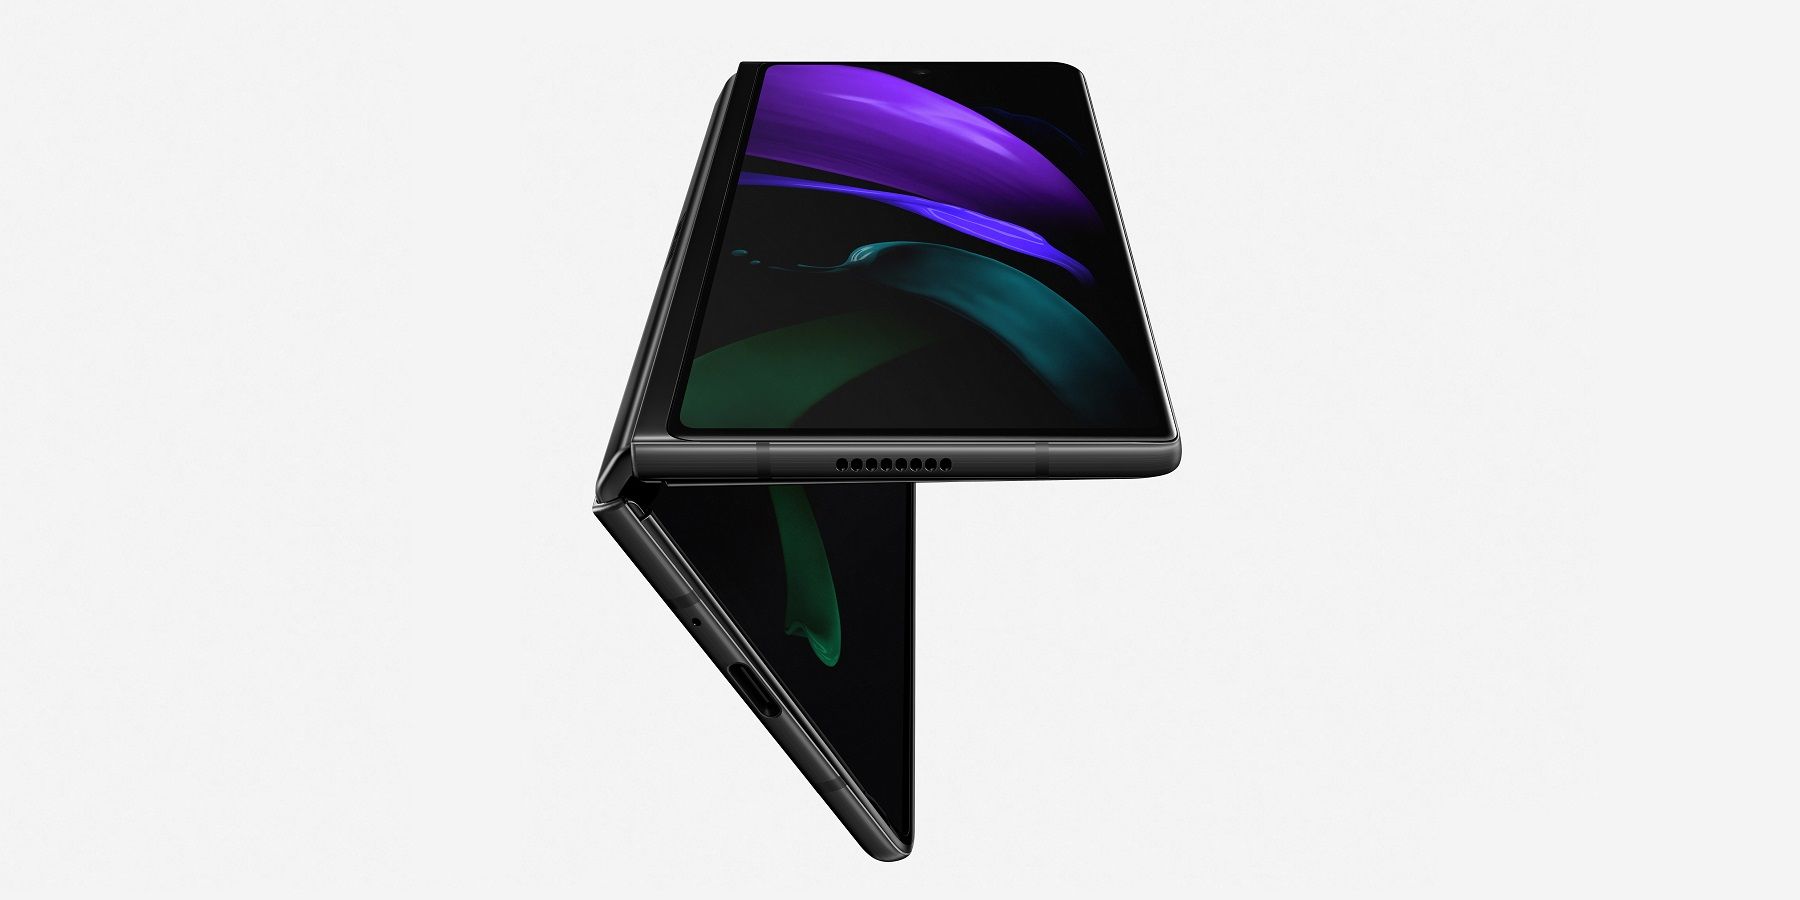 Galaxy Z Fold 2 Whats New With Samsungs Latest Foldable Smartphone